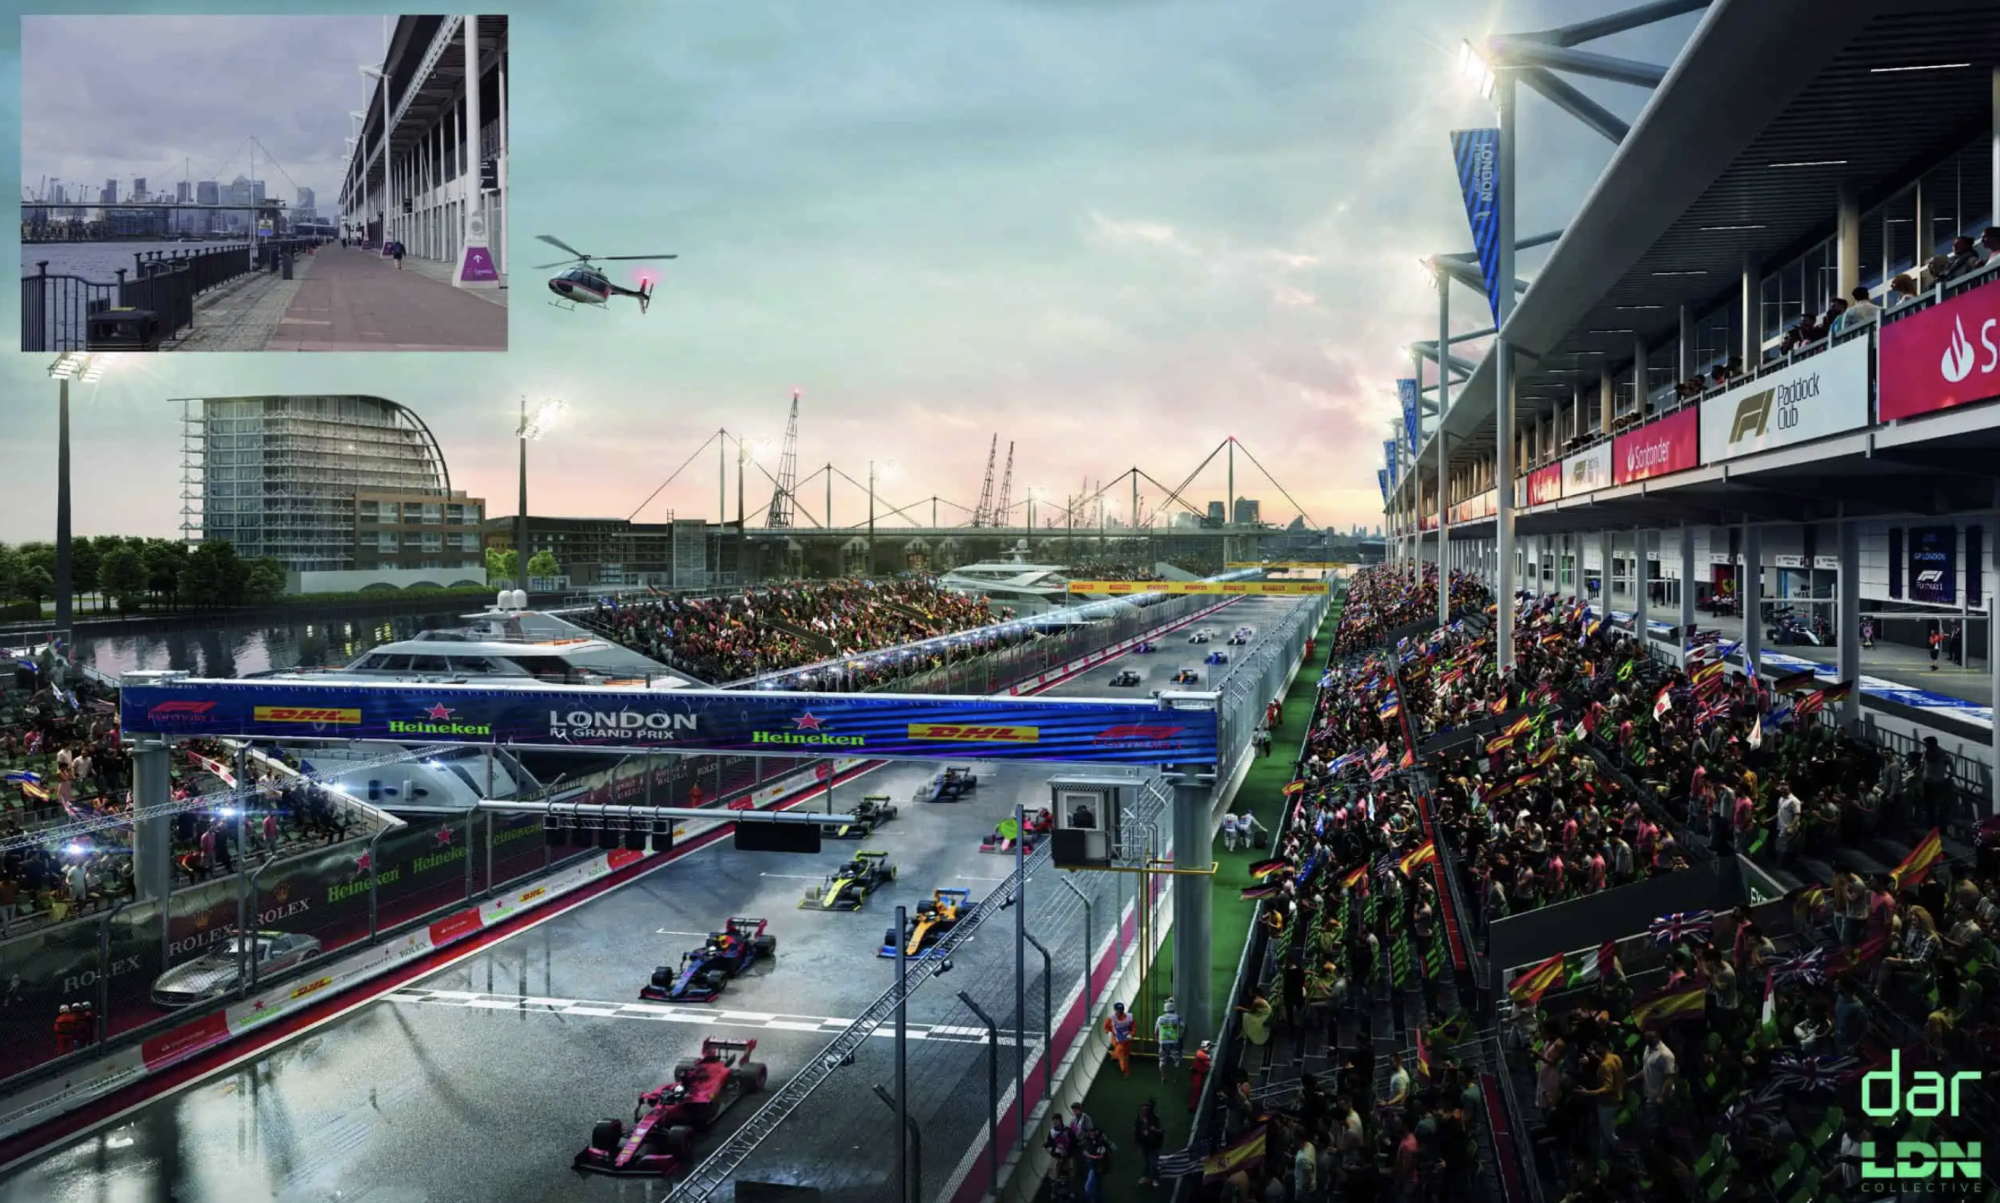 Royal Docks to be Reimagined as Potential London Grand Prix Host